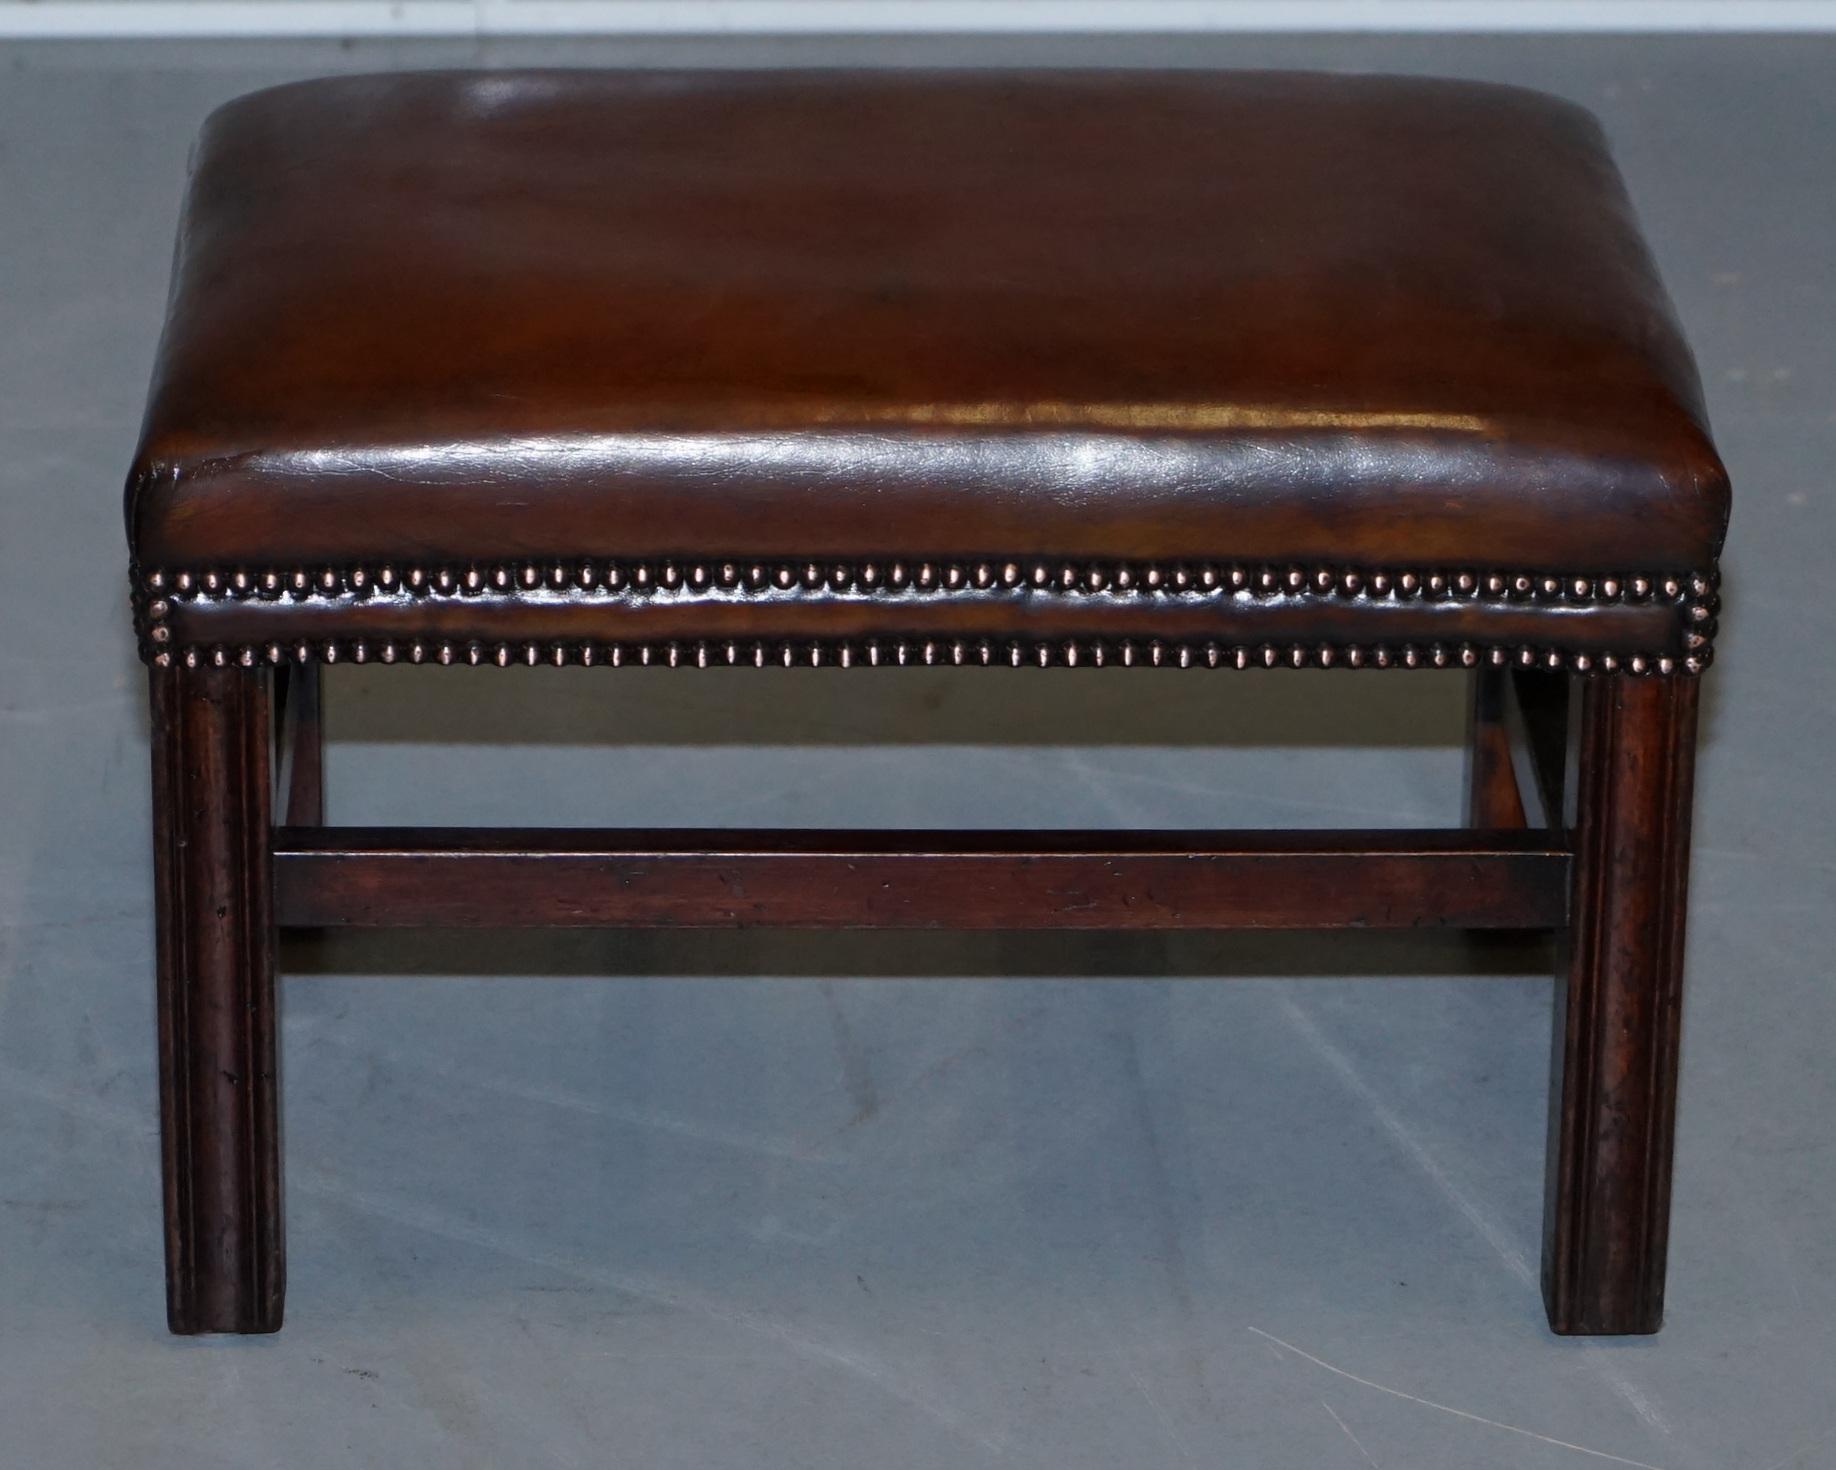 We are delighted to this absolutely stunning fully restored cigar brown leather footstool

A good looking and well-made piece, it has been fully restored to include being stripped back, hand dyed, antiqued, hand dyed again and then sealed, the